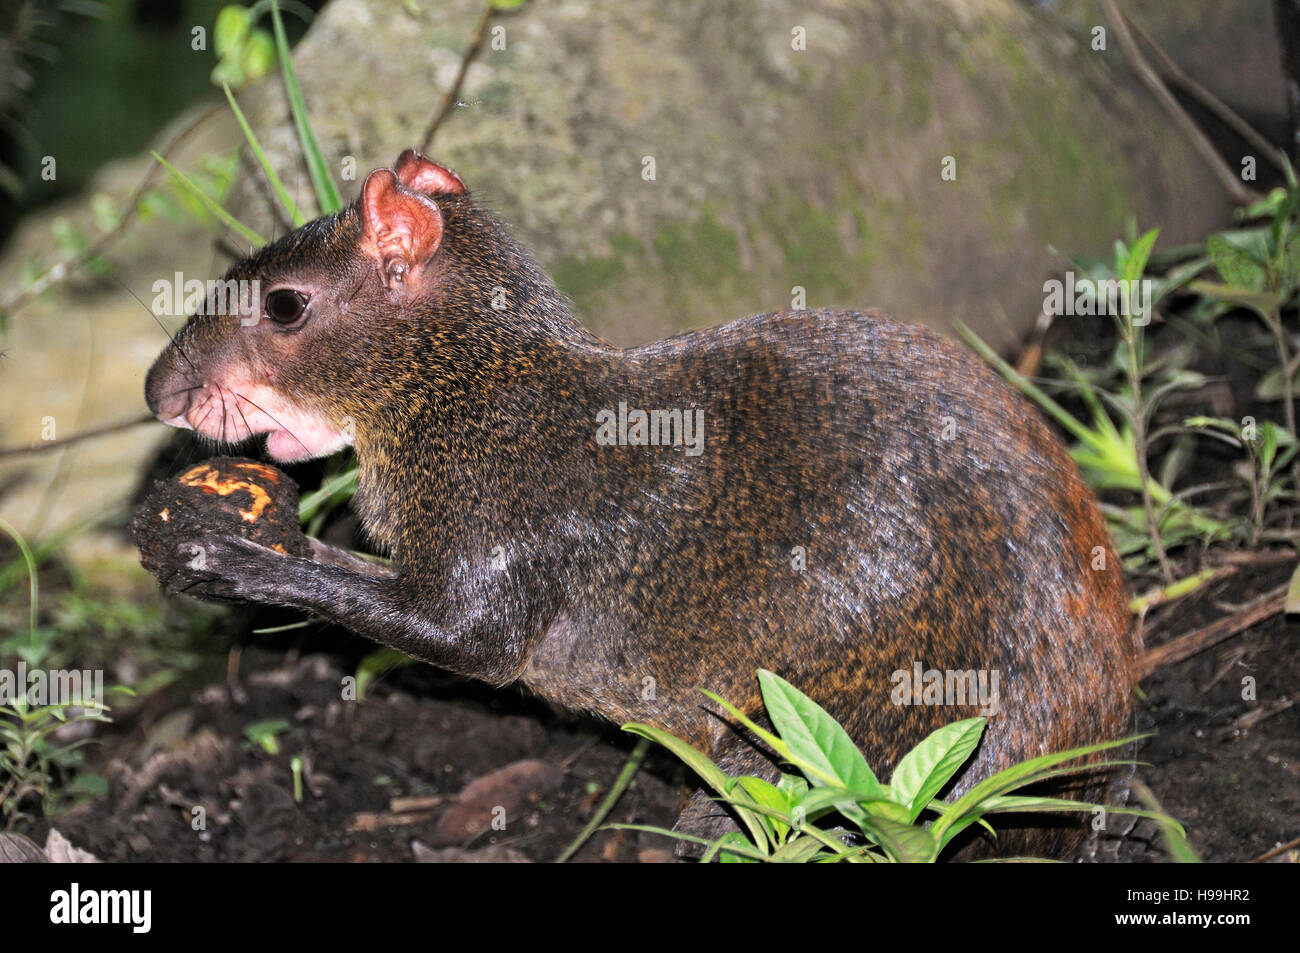 A Central American agouti, eating some fruit, Rainforest, Gamboa, Panama Stock Photo